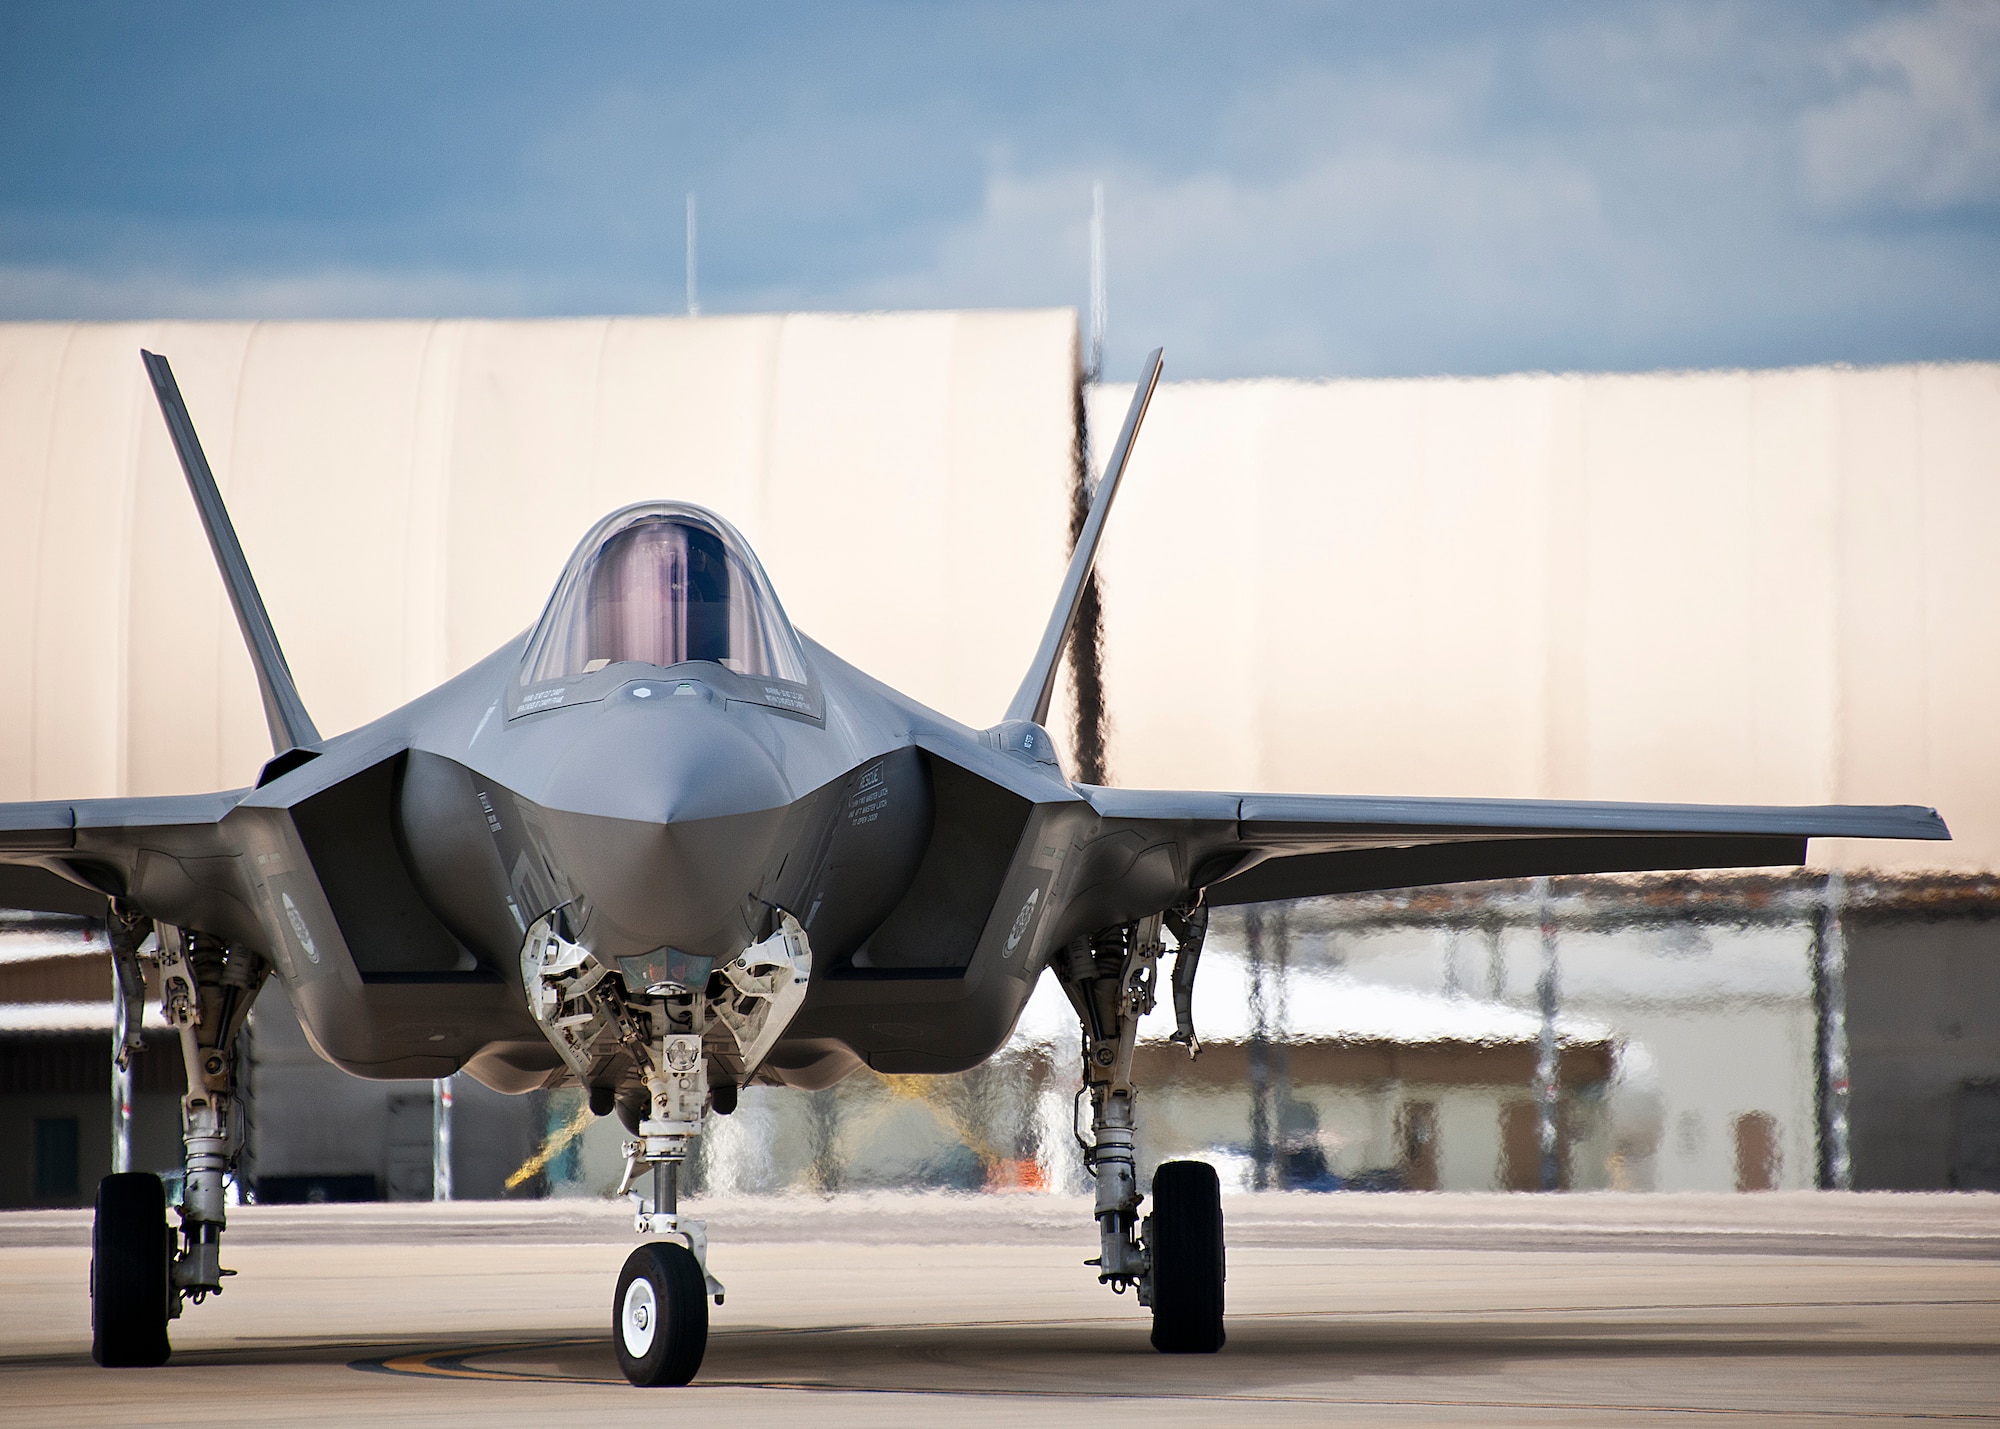 An F-35A Lightning II pilot turns his aircraft along the yellow taxi line on the 33rd Fighter Wing flightline at Eglin Air Force Base, Fla.  (U.S. Air Force photo/Samuel King Jr.)